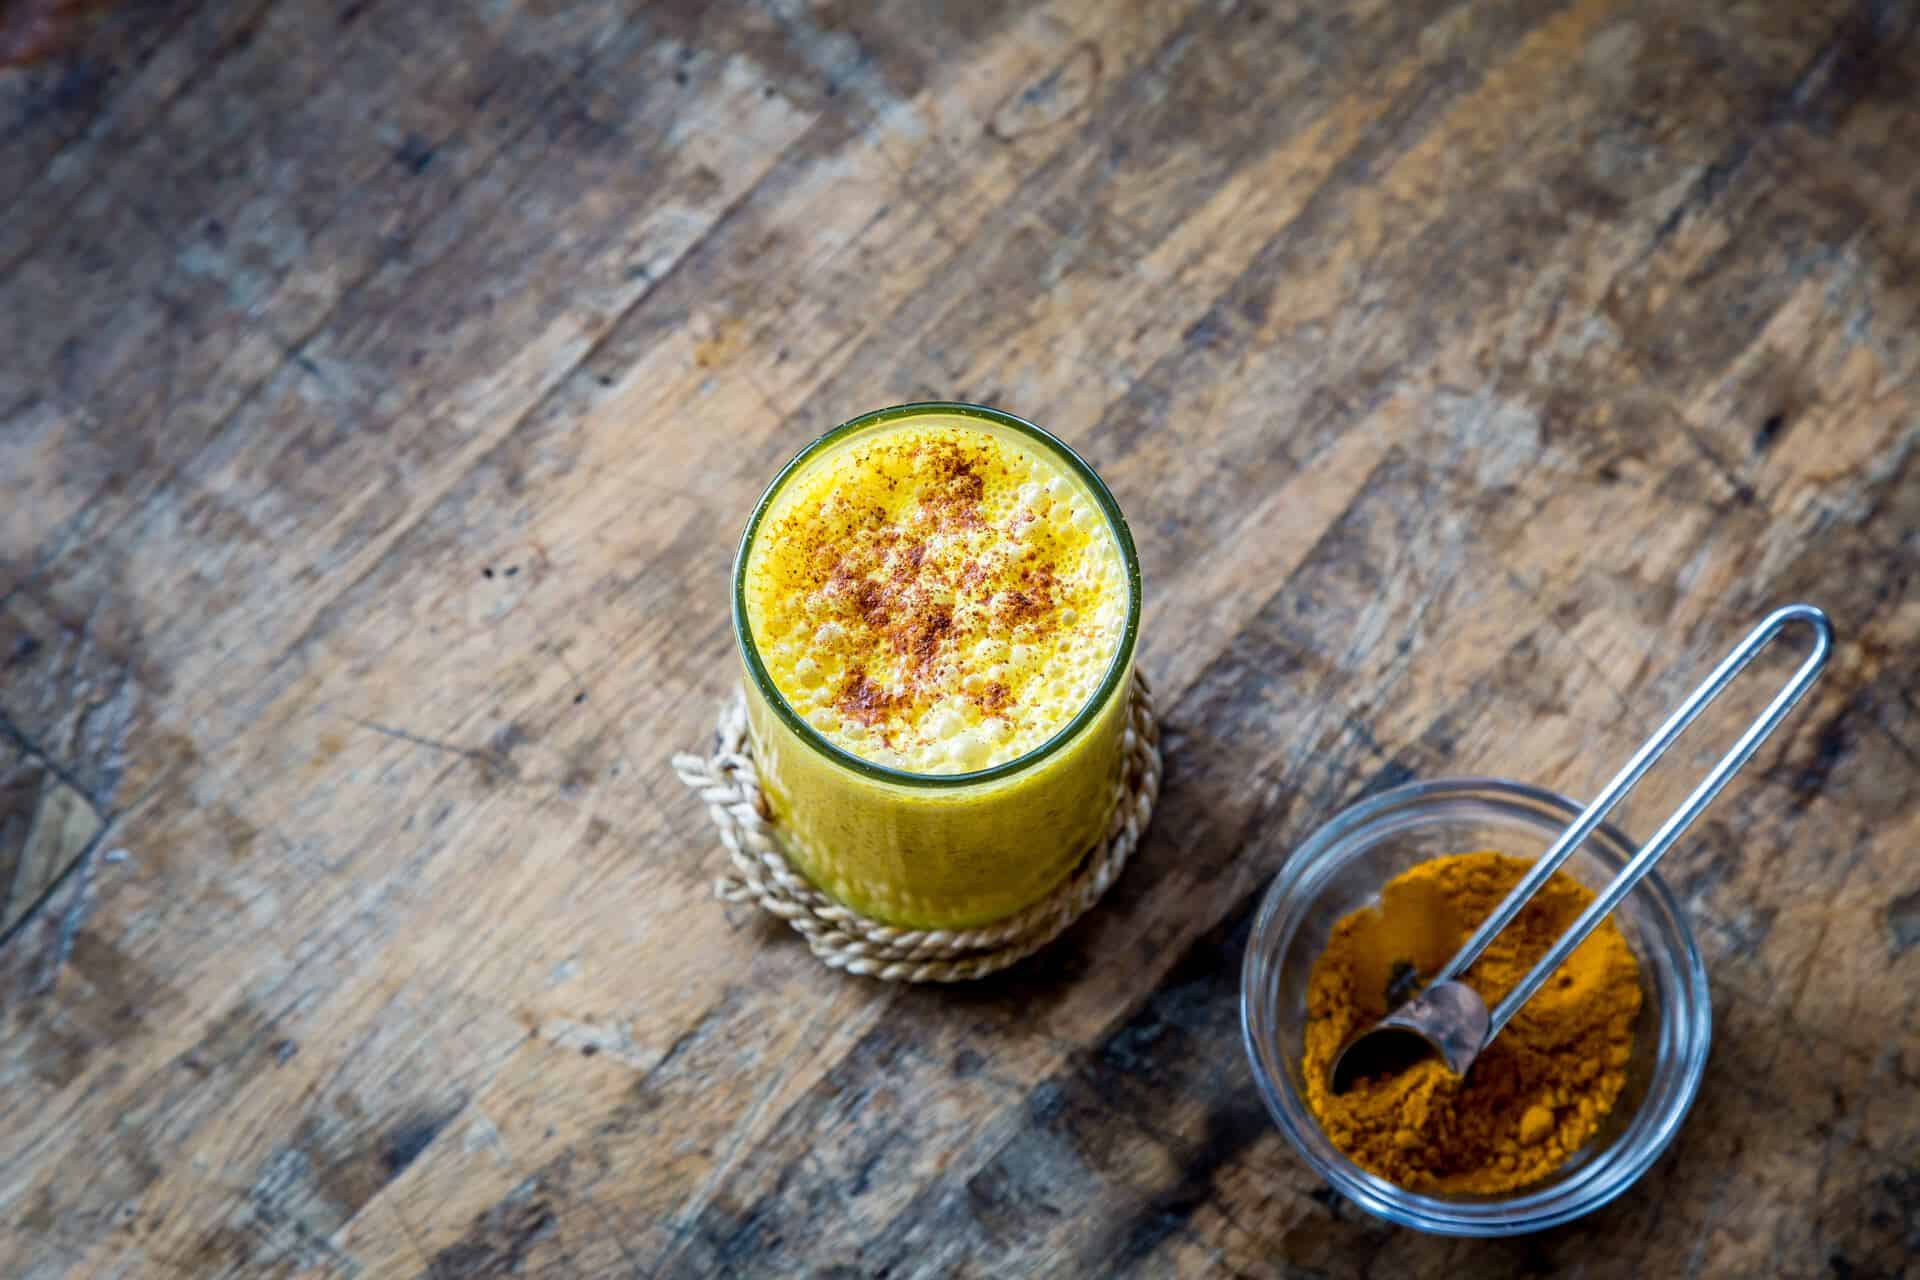 Turmeric: A Natural Anti-Inflammatory for Your Pain and Much More!